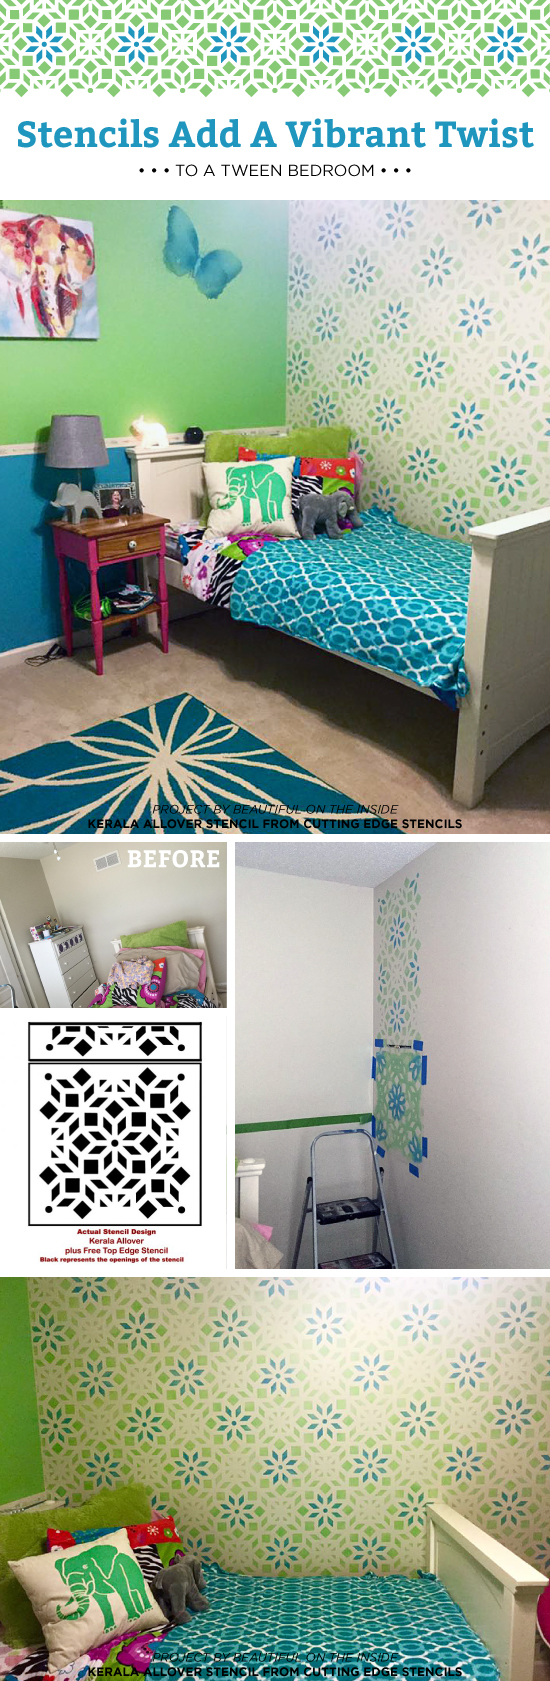 Cutting Edge Stencils shares a DIY stenciled tween bedroom makeover using the Kerala Allover Stencil. http://www.cuttingedgestencils.com/kerala-indian-stencil-geometric-pattern-stencils.html